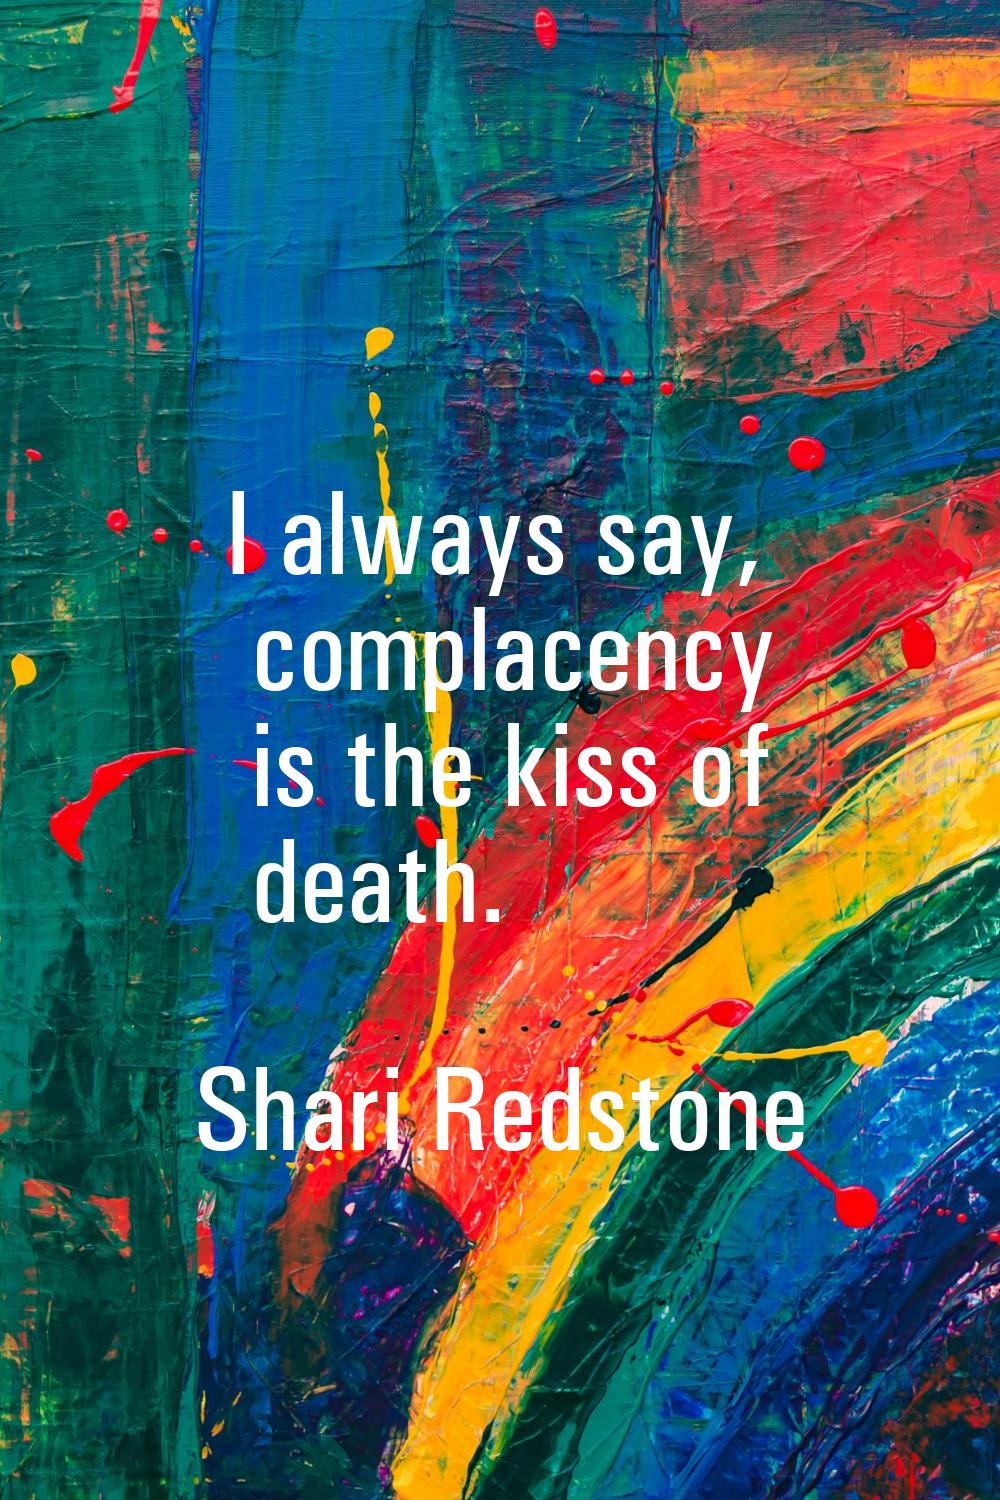 I always say, complacency is the kiss of death.